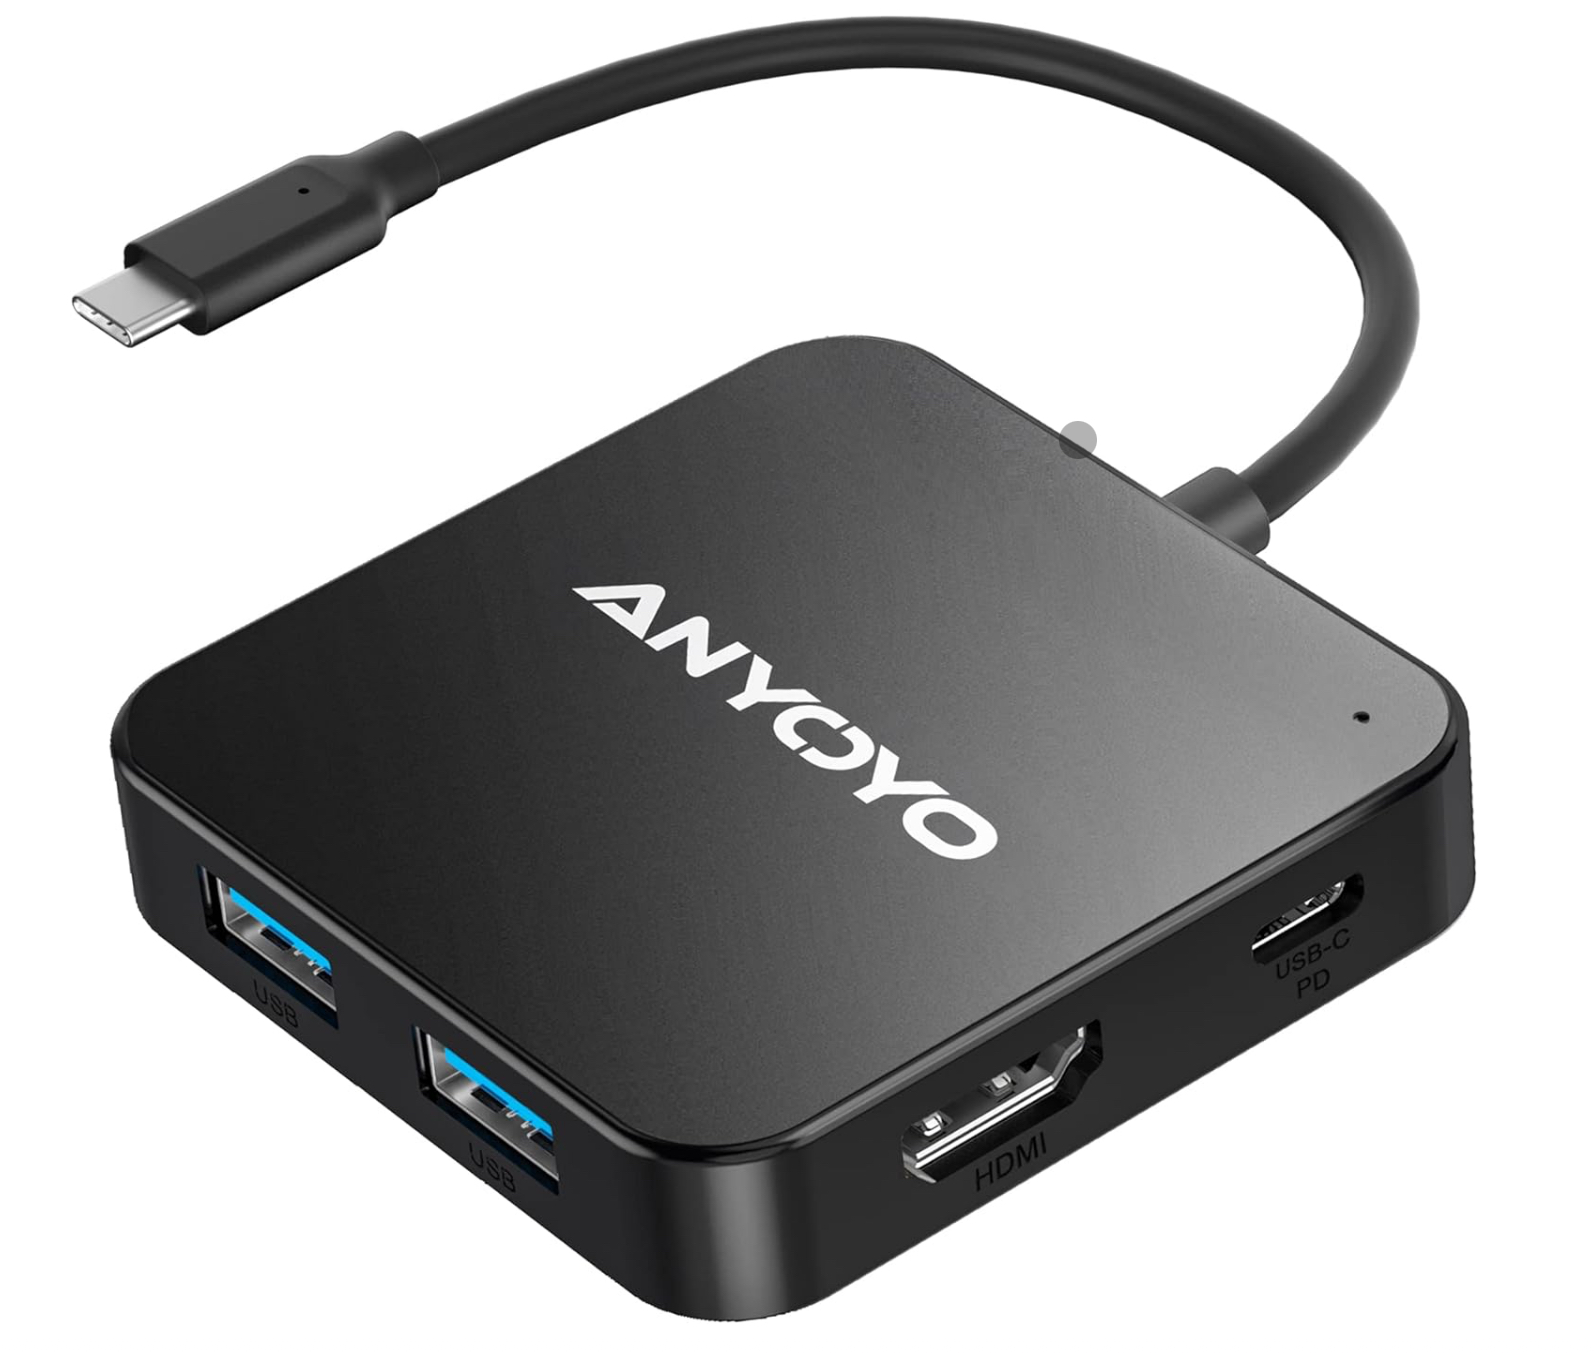 Anyoyo USB C Hub with Power Delivery up 100W